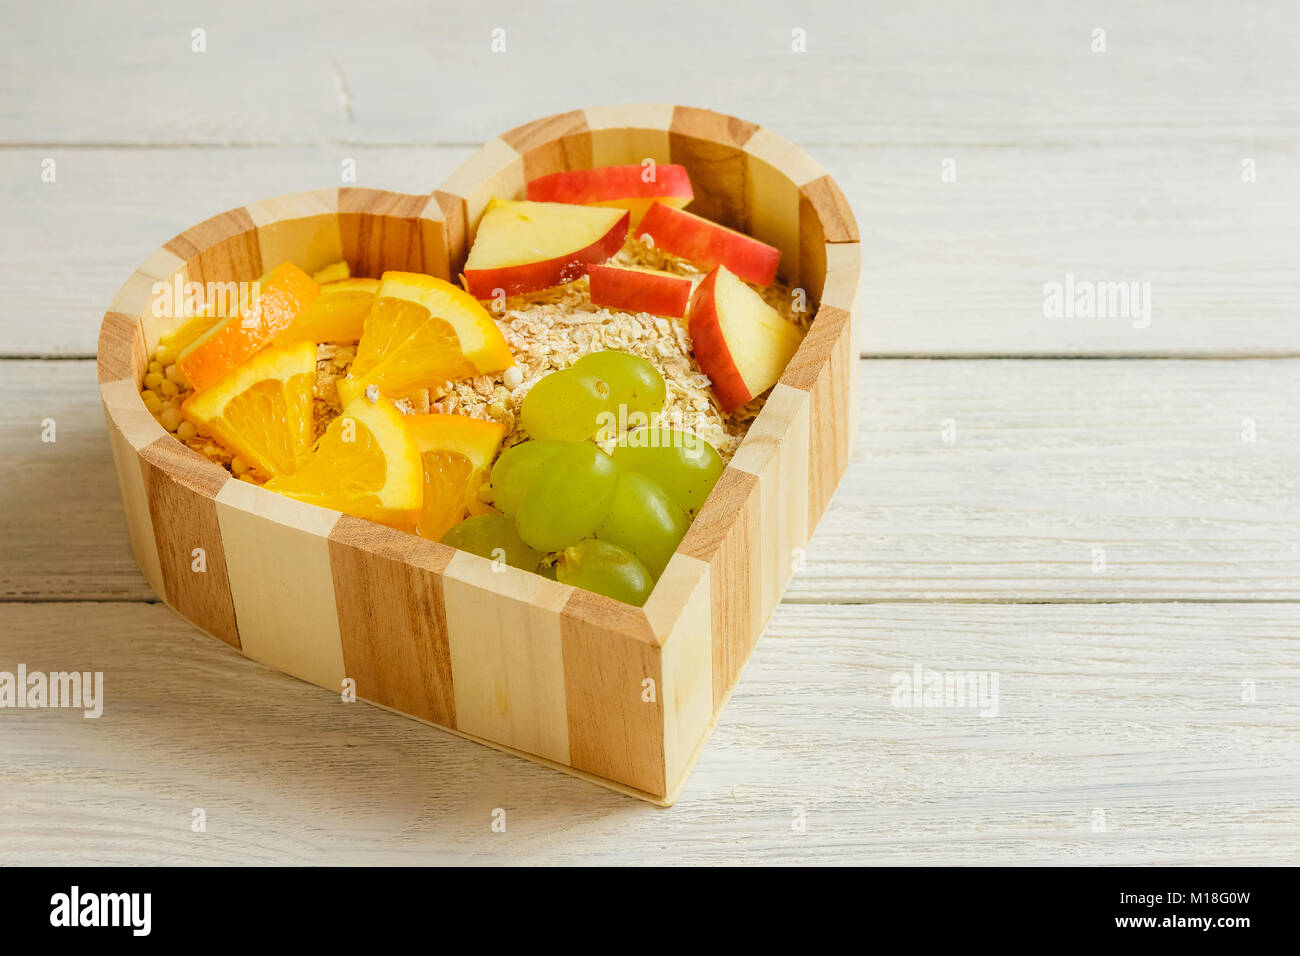 Fruits heart on the wooden background. Healthy food concept. Stock Photo